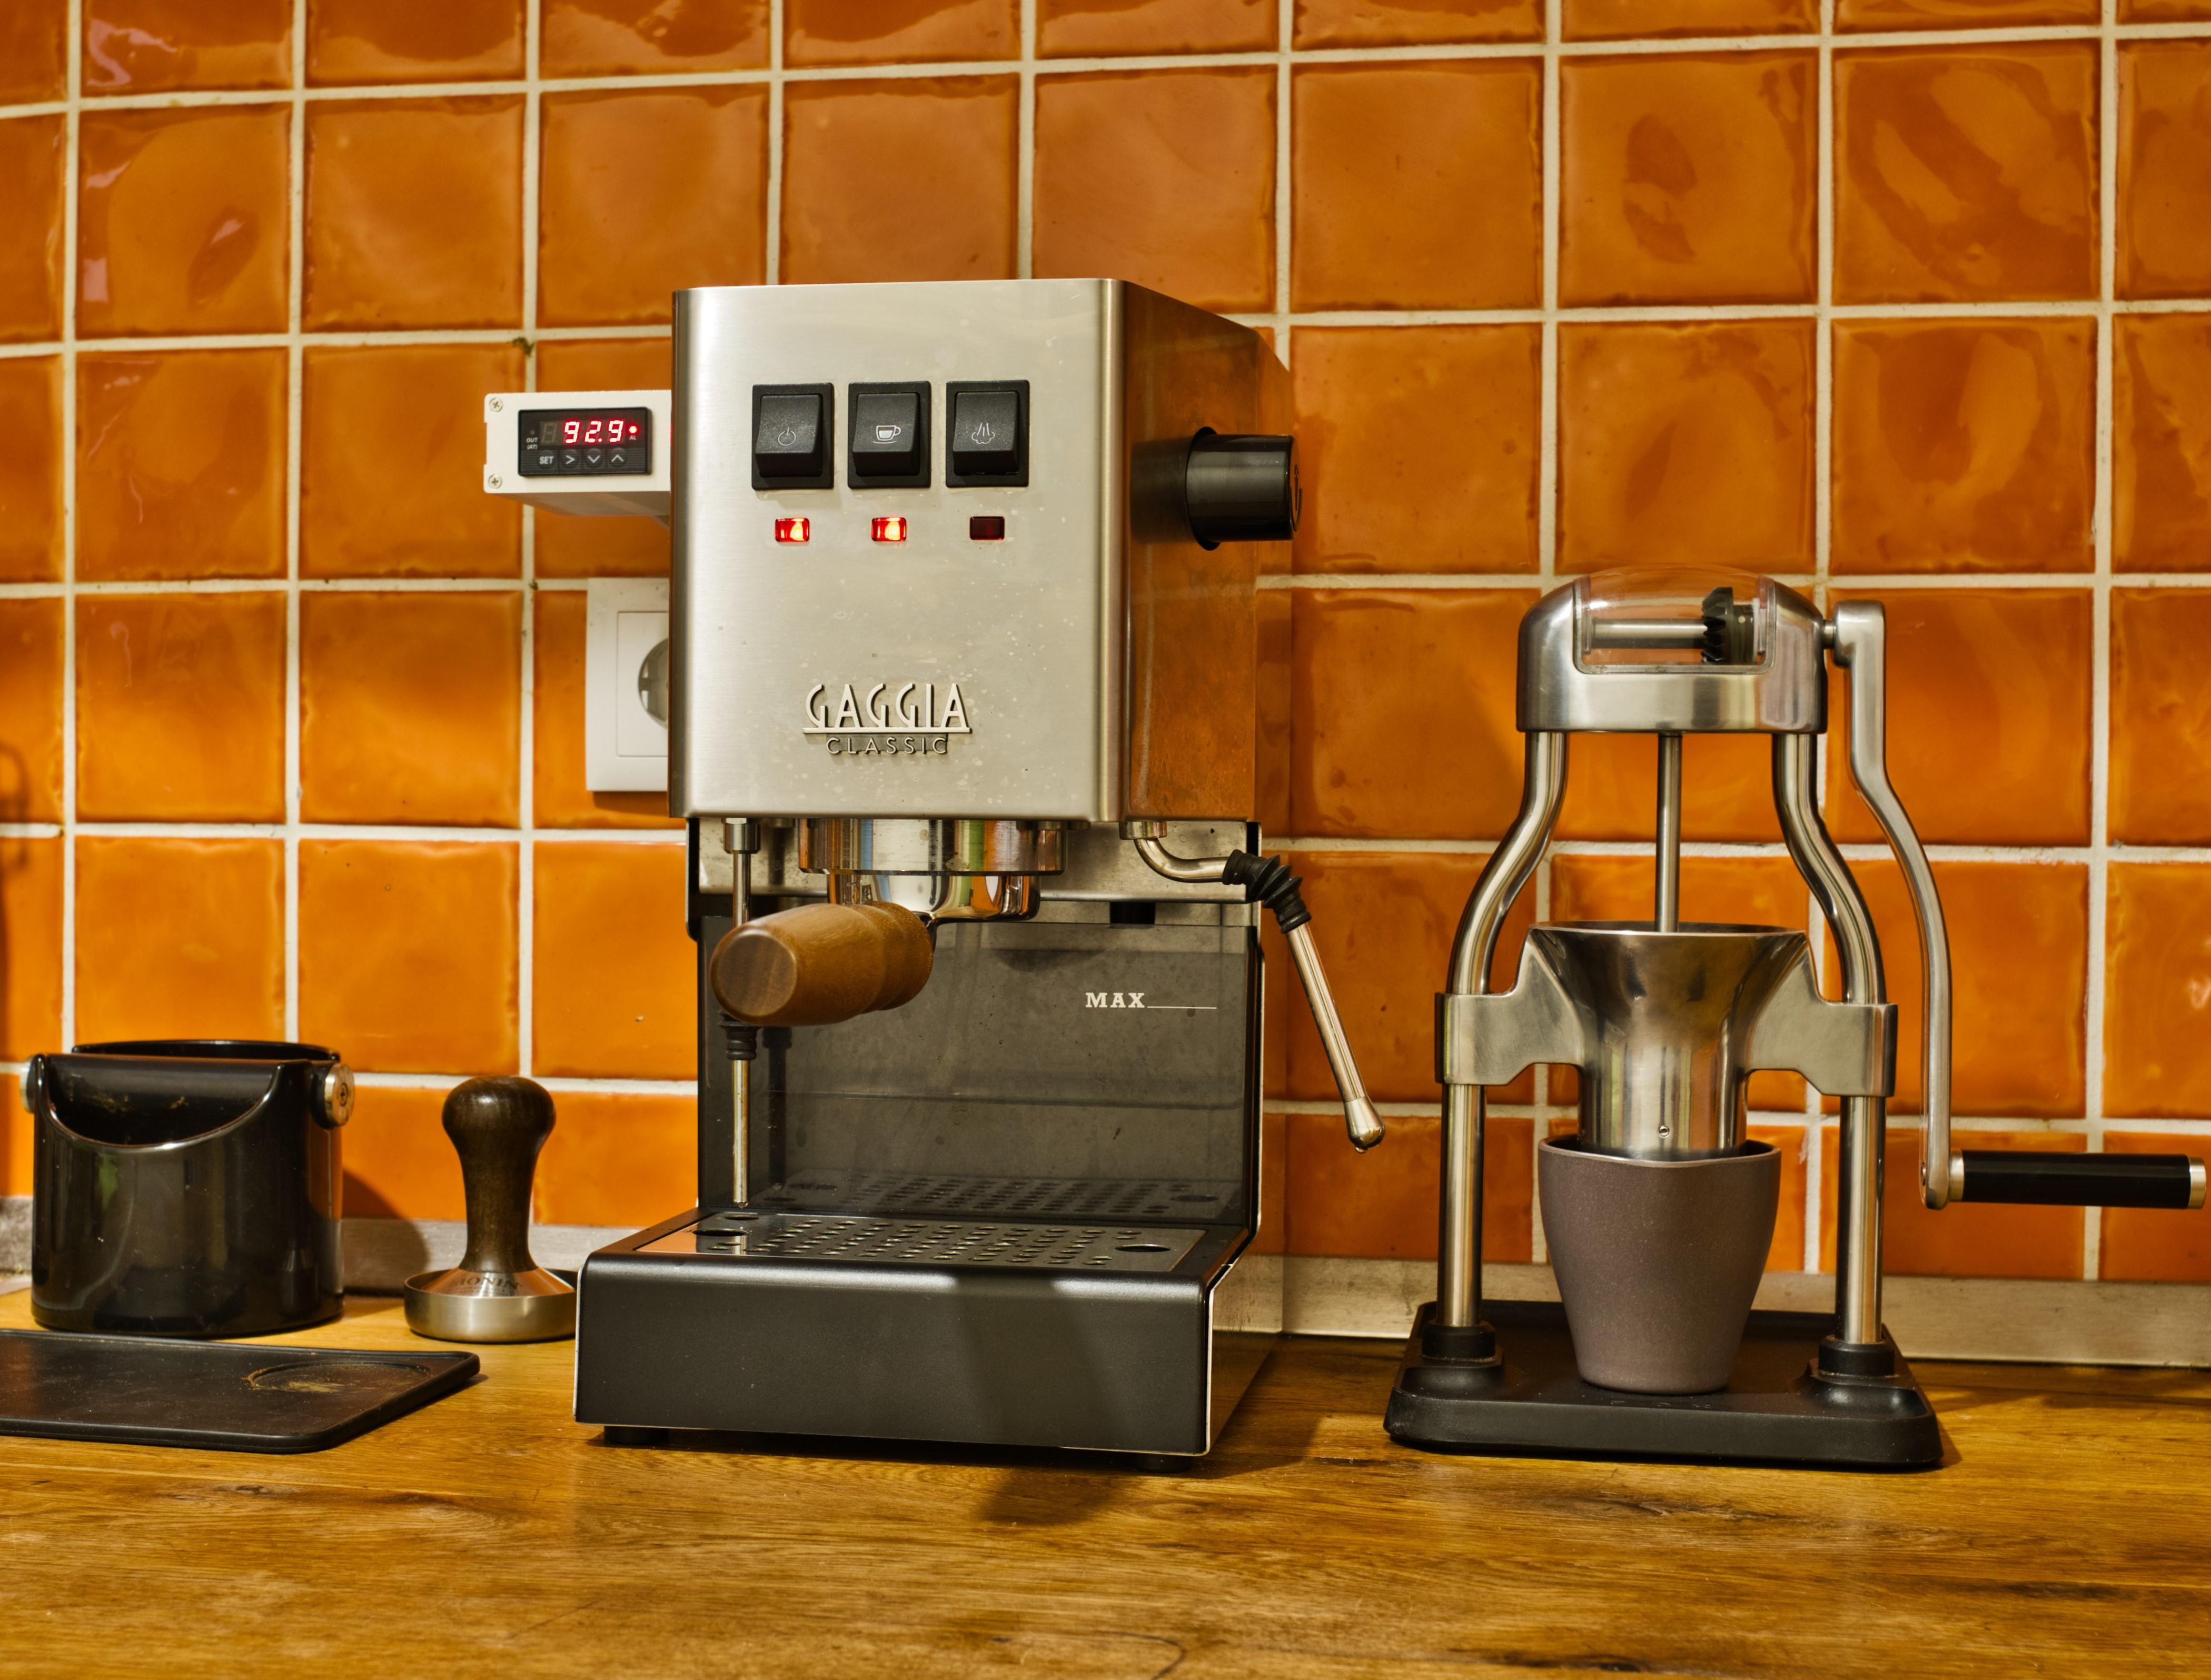 Shades of Coffee - Gaggia Classic kits from MrShades